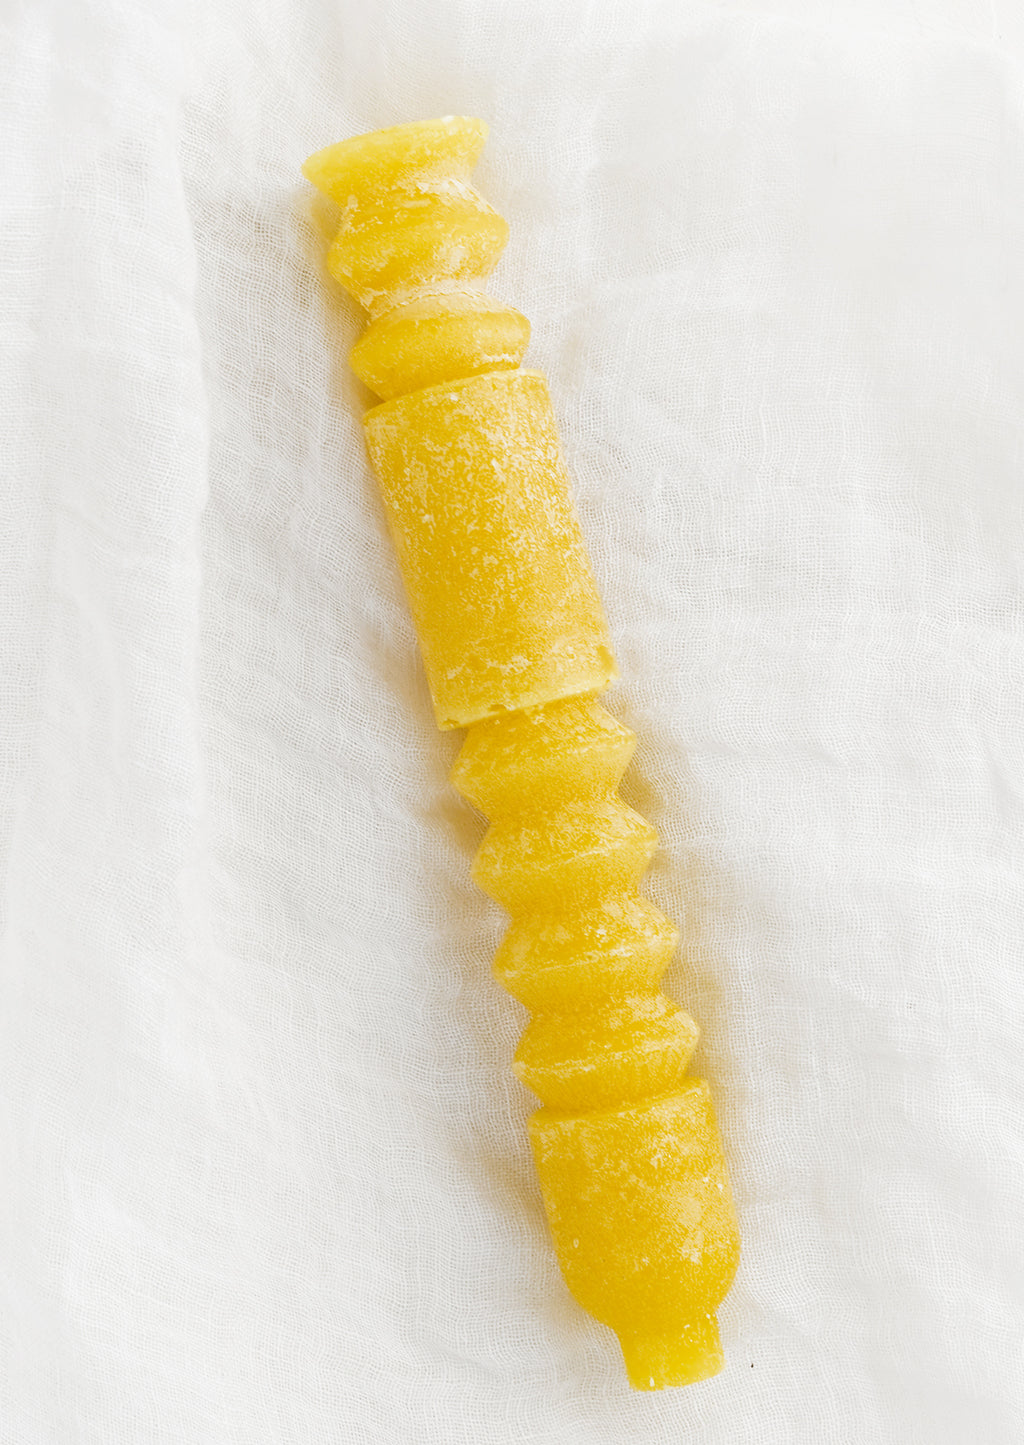 Beeswax: A geometric shape taper candle in beeswax (yellow).